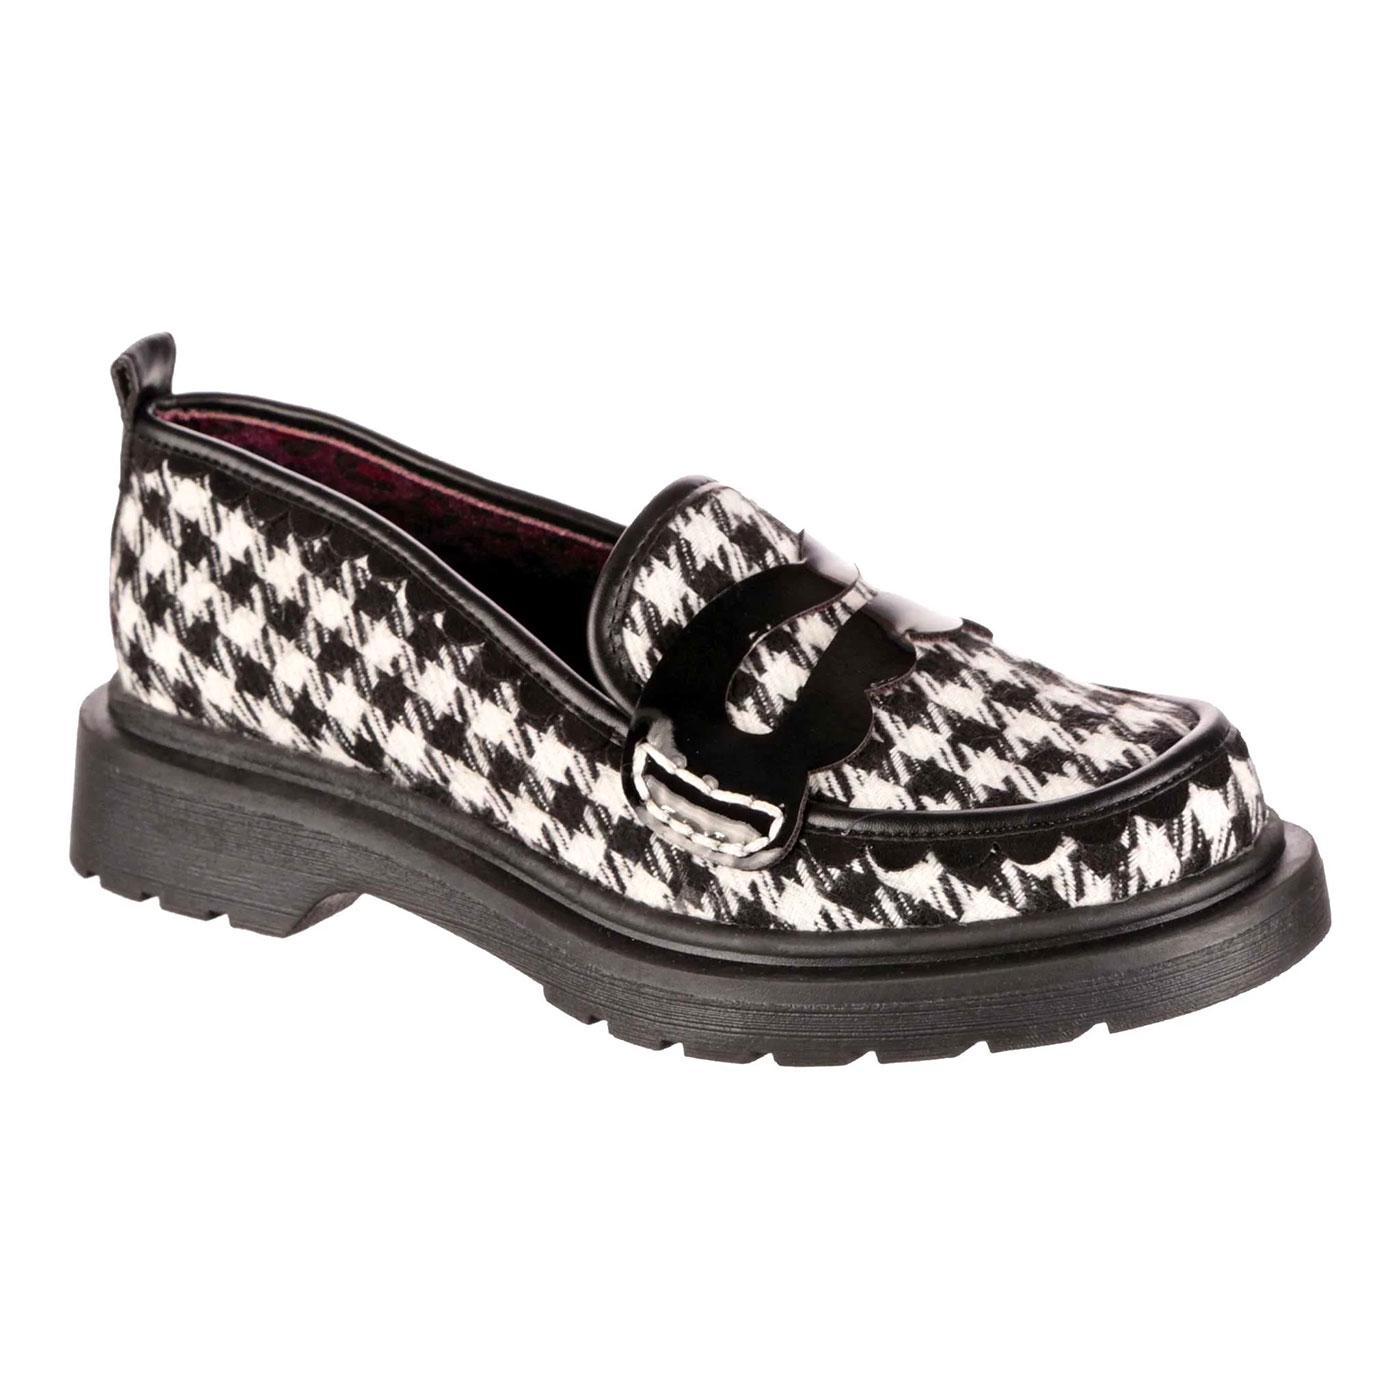 Old Dawg Irregular Choice Houndstooth Loafers B/W